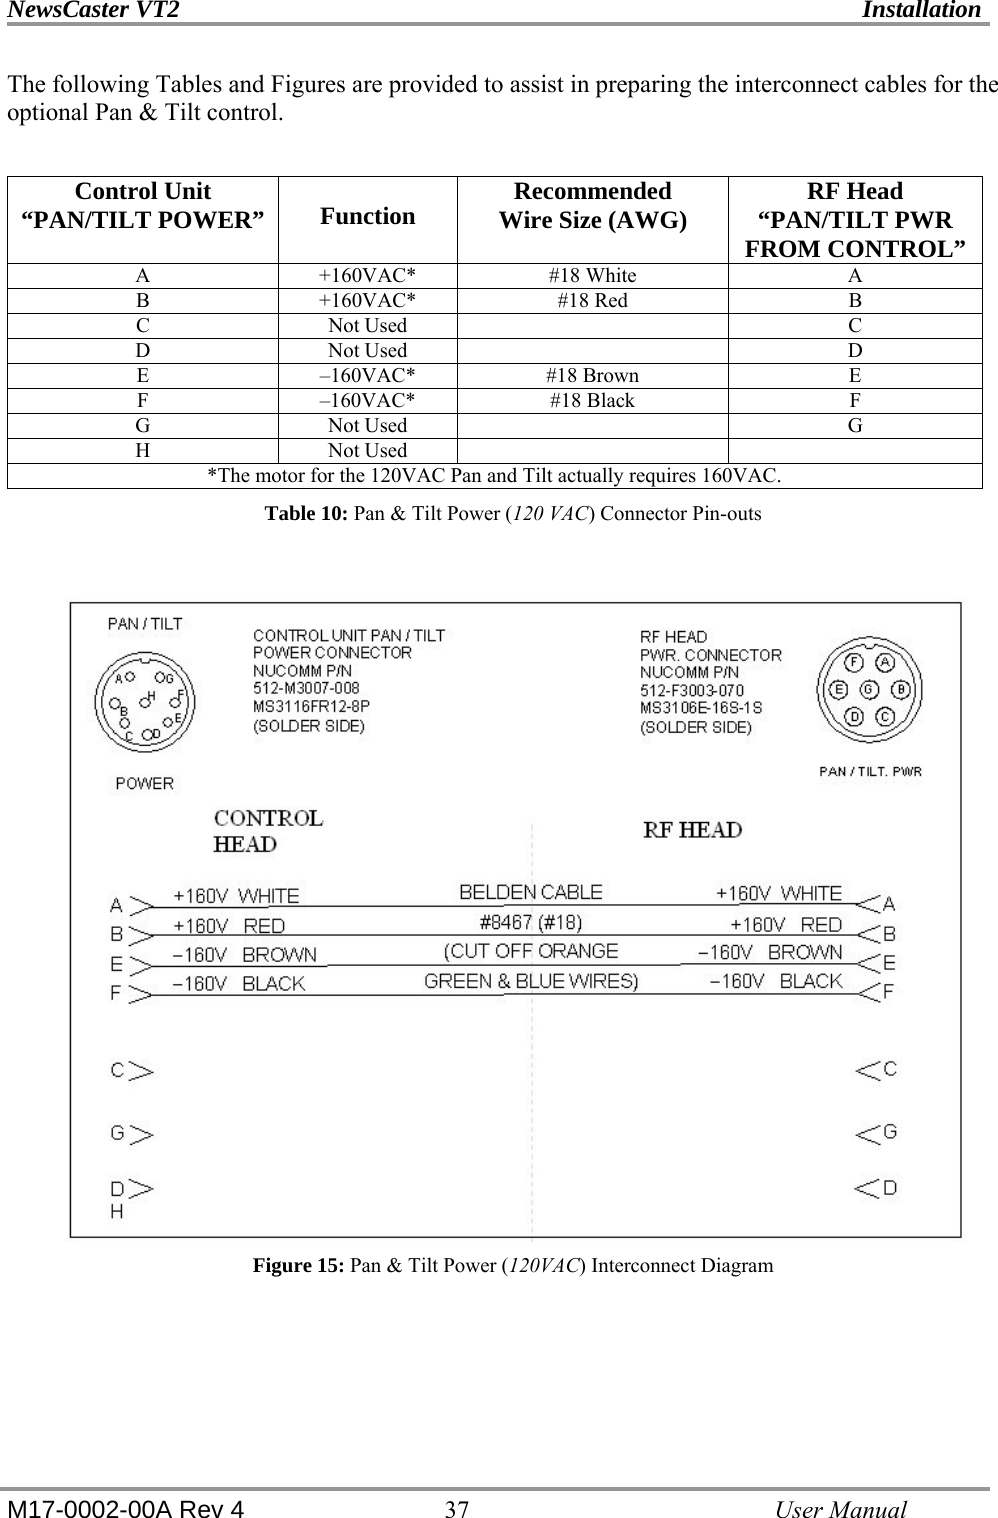 NewsCaster VT2    Installation  M17-0002-00A Rev 4 37   User Manual The following Tables and Figures are provided to assist in preparing the interconnect cables for the optional Pan &amp; Tilt control.  Control Unit “PAN/TILT POWER”  Function  Recommended Wire Size (AWG)  RF Head “PAN/TILT PWR FROM CONTROL” A +160VAC* #18 White  A B +160VAC* #18 Red  B C Not Used    C D Not Used    D E –160VAC* #18 Brown  E F –160VAC* #18 Black  F G Not Used    G H Not Used     *The motor for the 120VAC Pan and Tilt actually requires 160VAC. Table 10: Pan &amp; Tilt Power (120 VAC) Connector Pin-outs   Figure 15: Pan &amp; Tilt Power (120VAC) Interconnect Diagram 